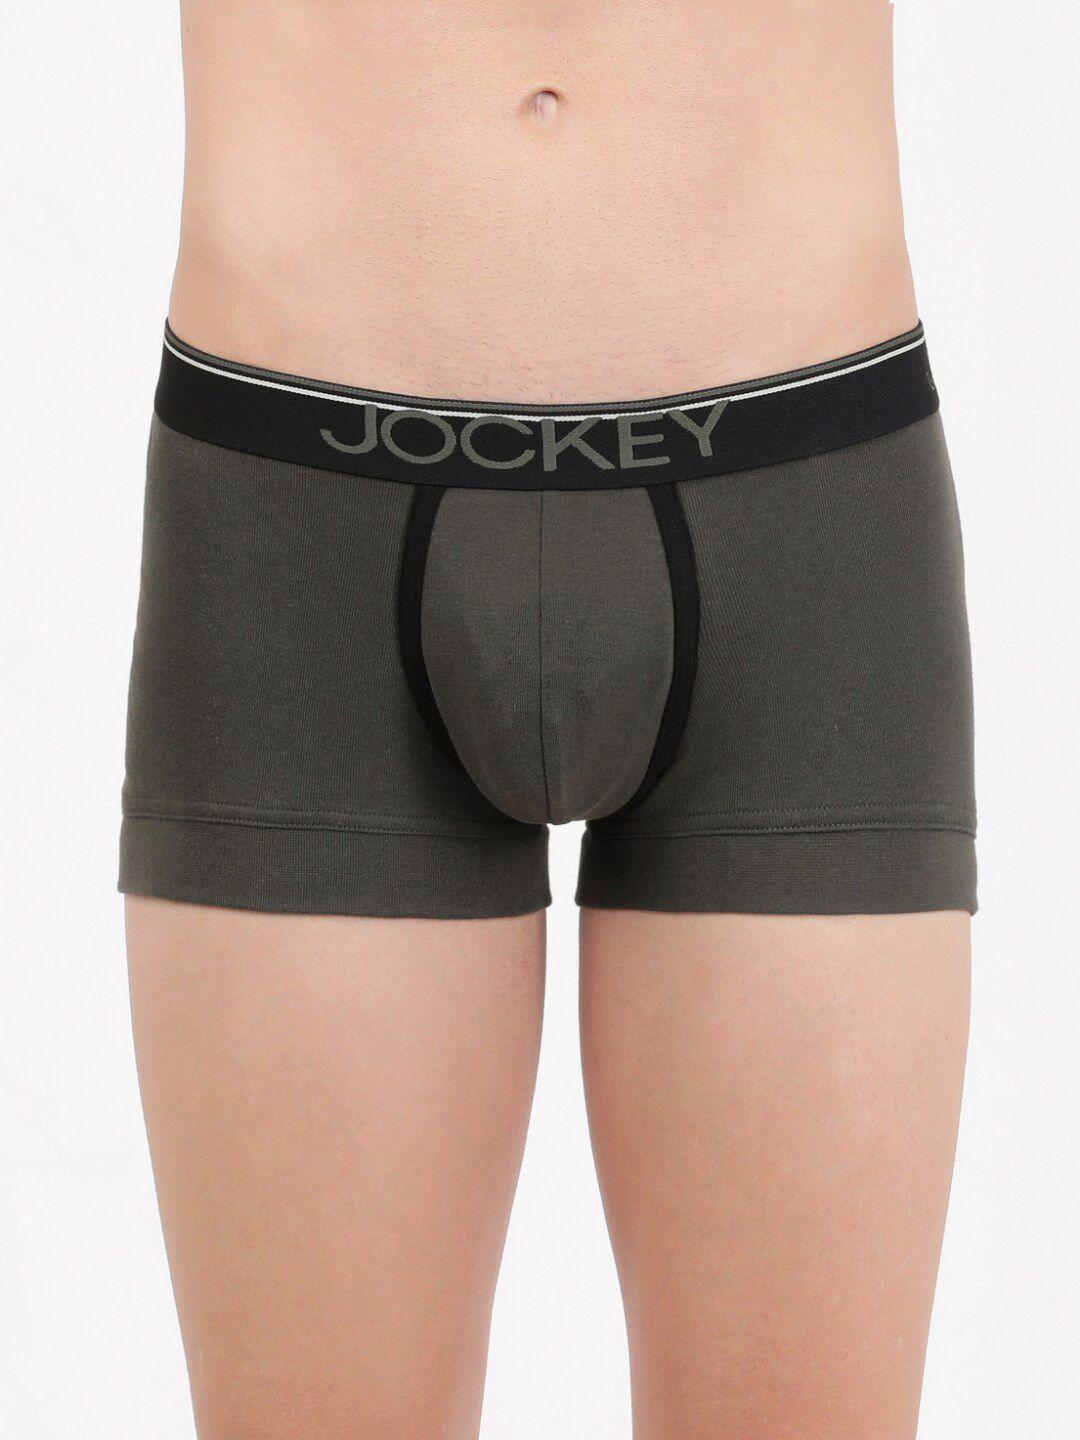 jockey-men-olive-geen-solid-pure-combed-cotton-trunks-8015-0105-dpolv